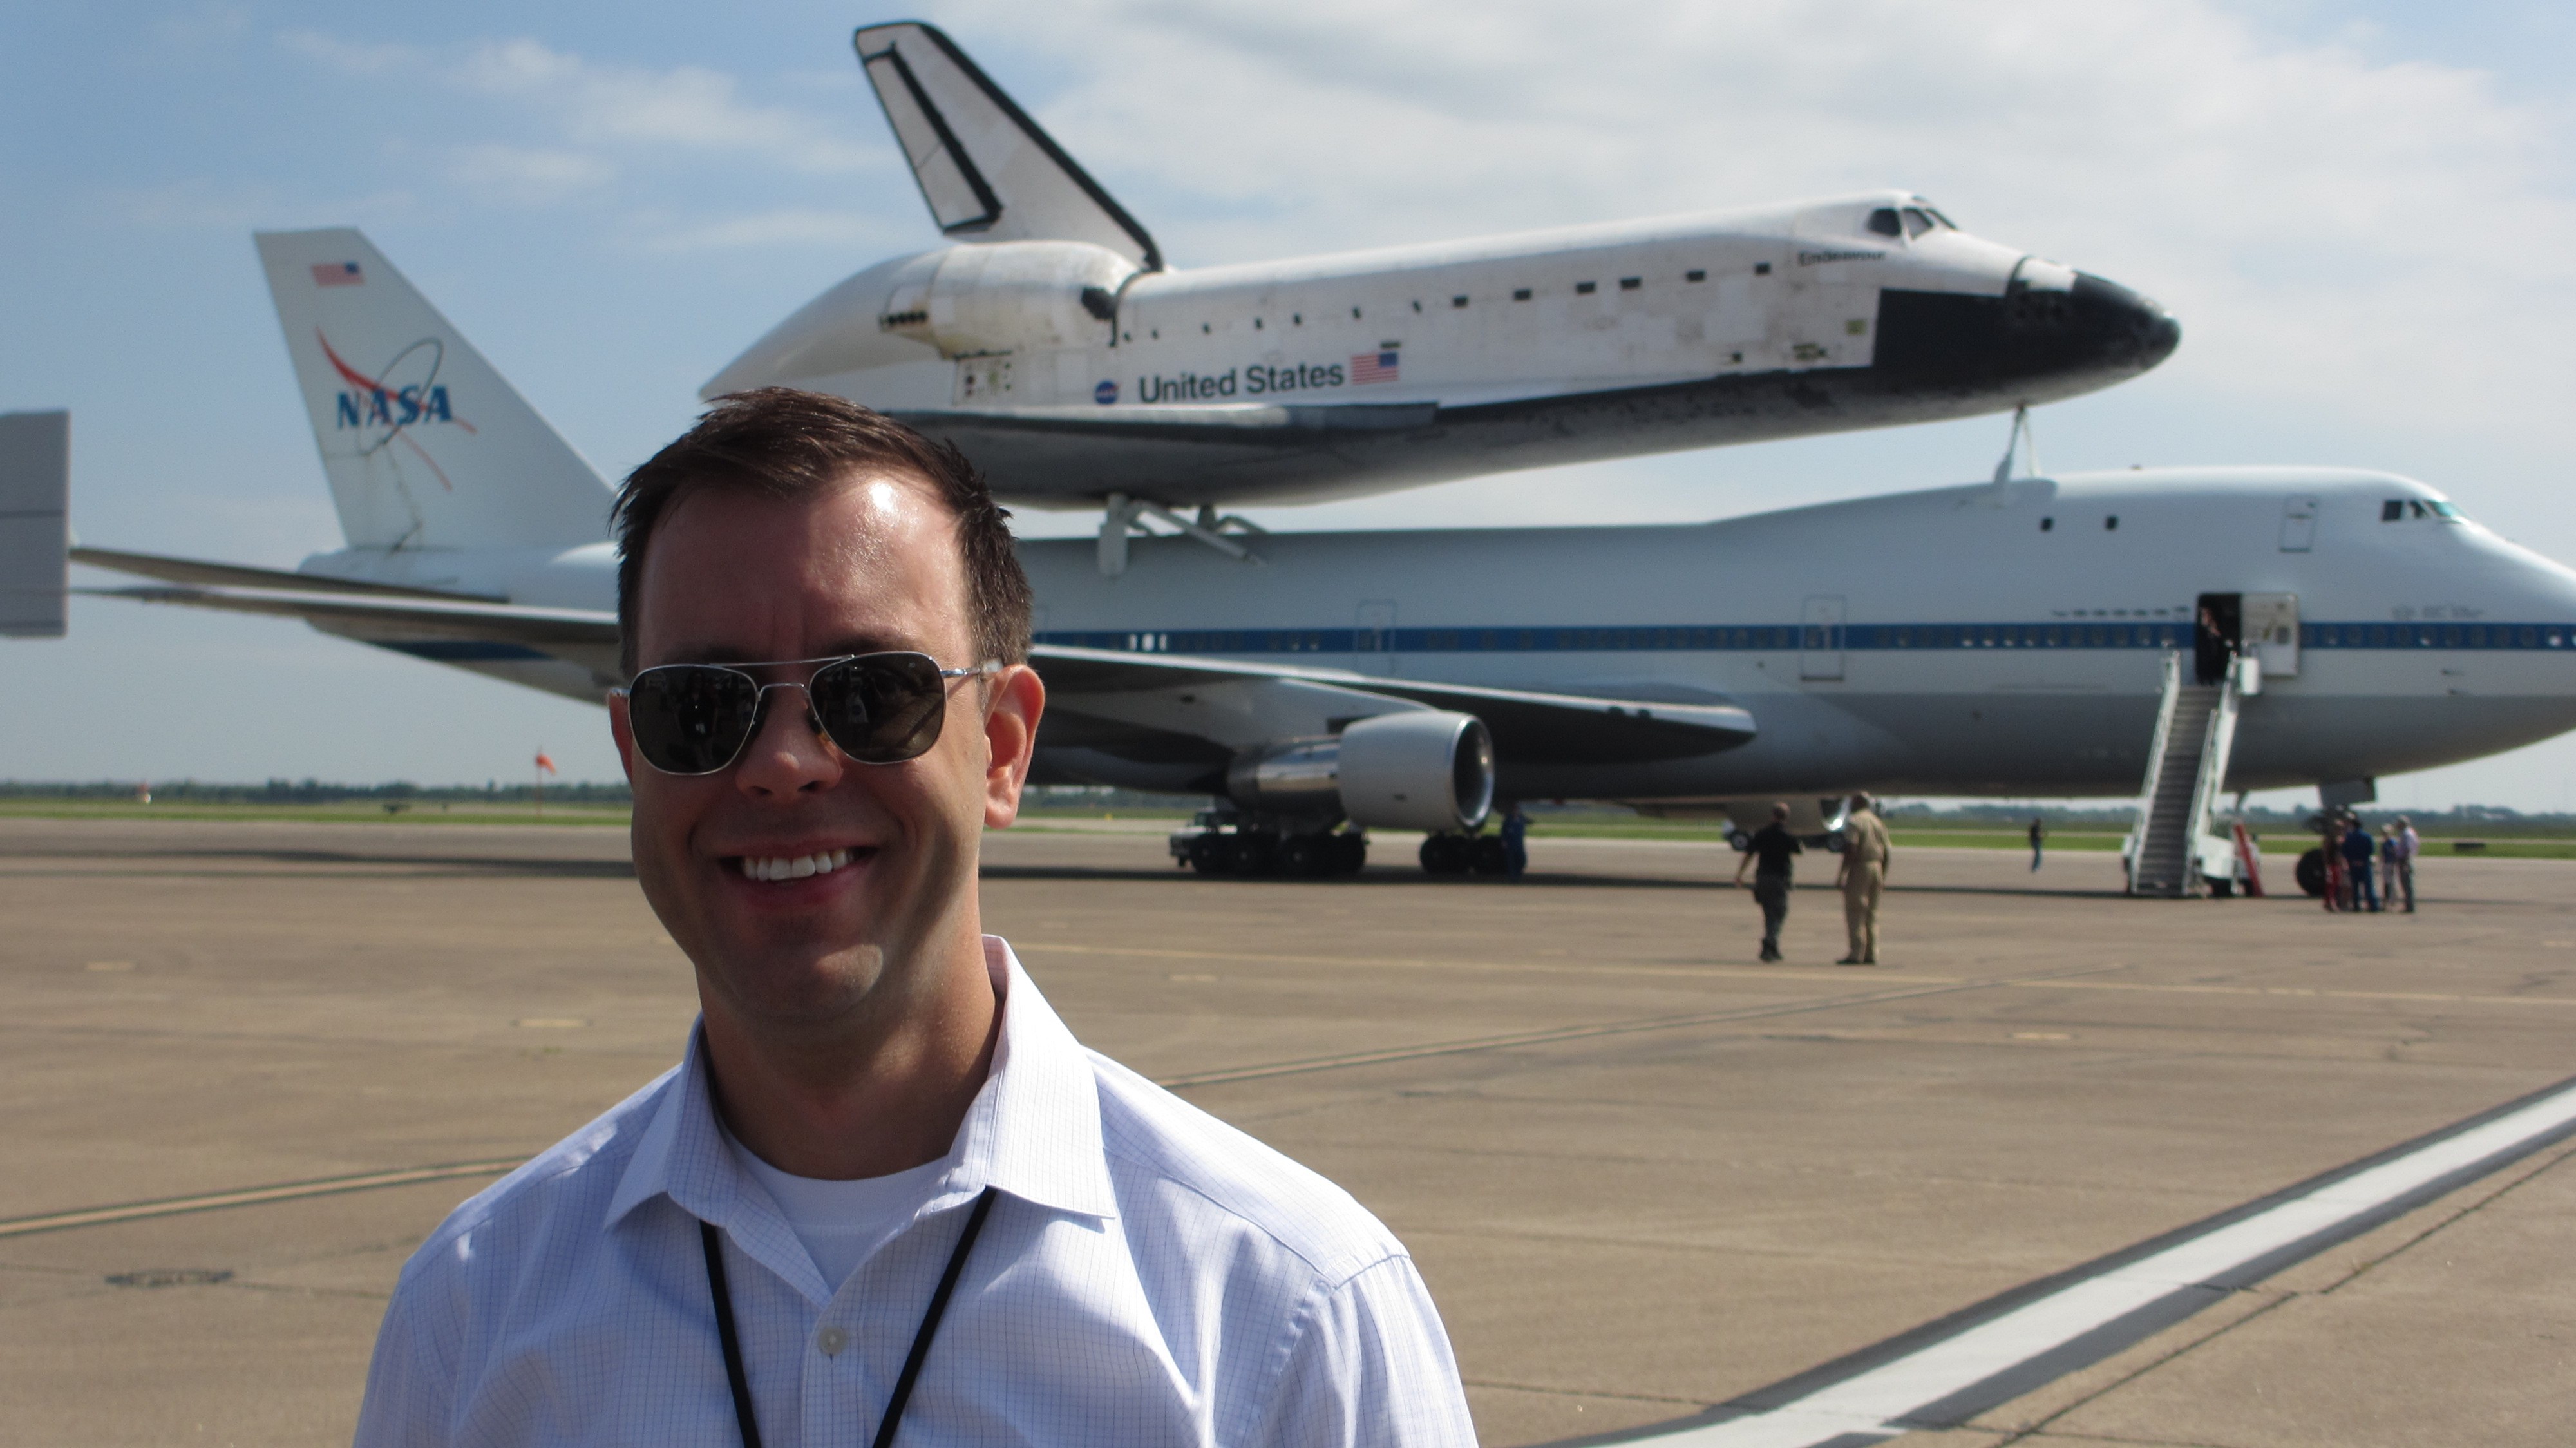 1999 Texas A&amp;M journalism graduate Josh Byerly stands on the tarmac with the Space Shuttle Endeavour atop a NASA Shuttle Carrier Aircraft in the background